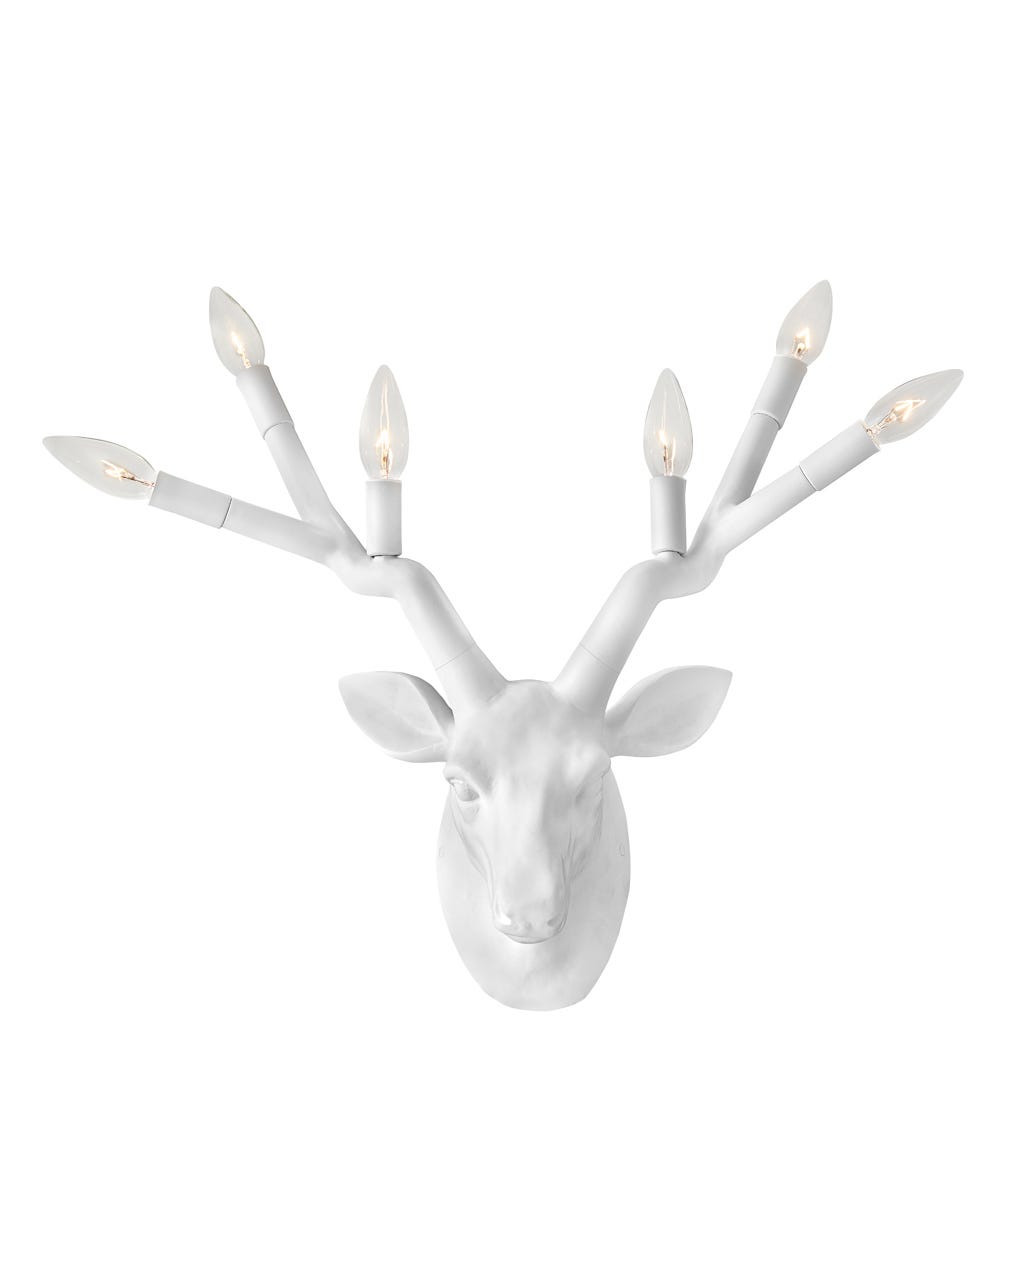 Hinkley Stag Sconce Sconce Hinkley Chalk White 9.25x22.75x20.0 